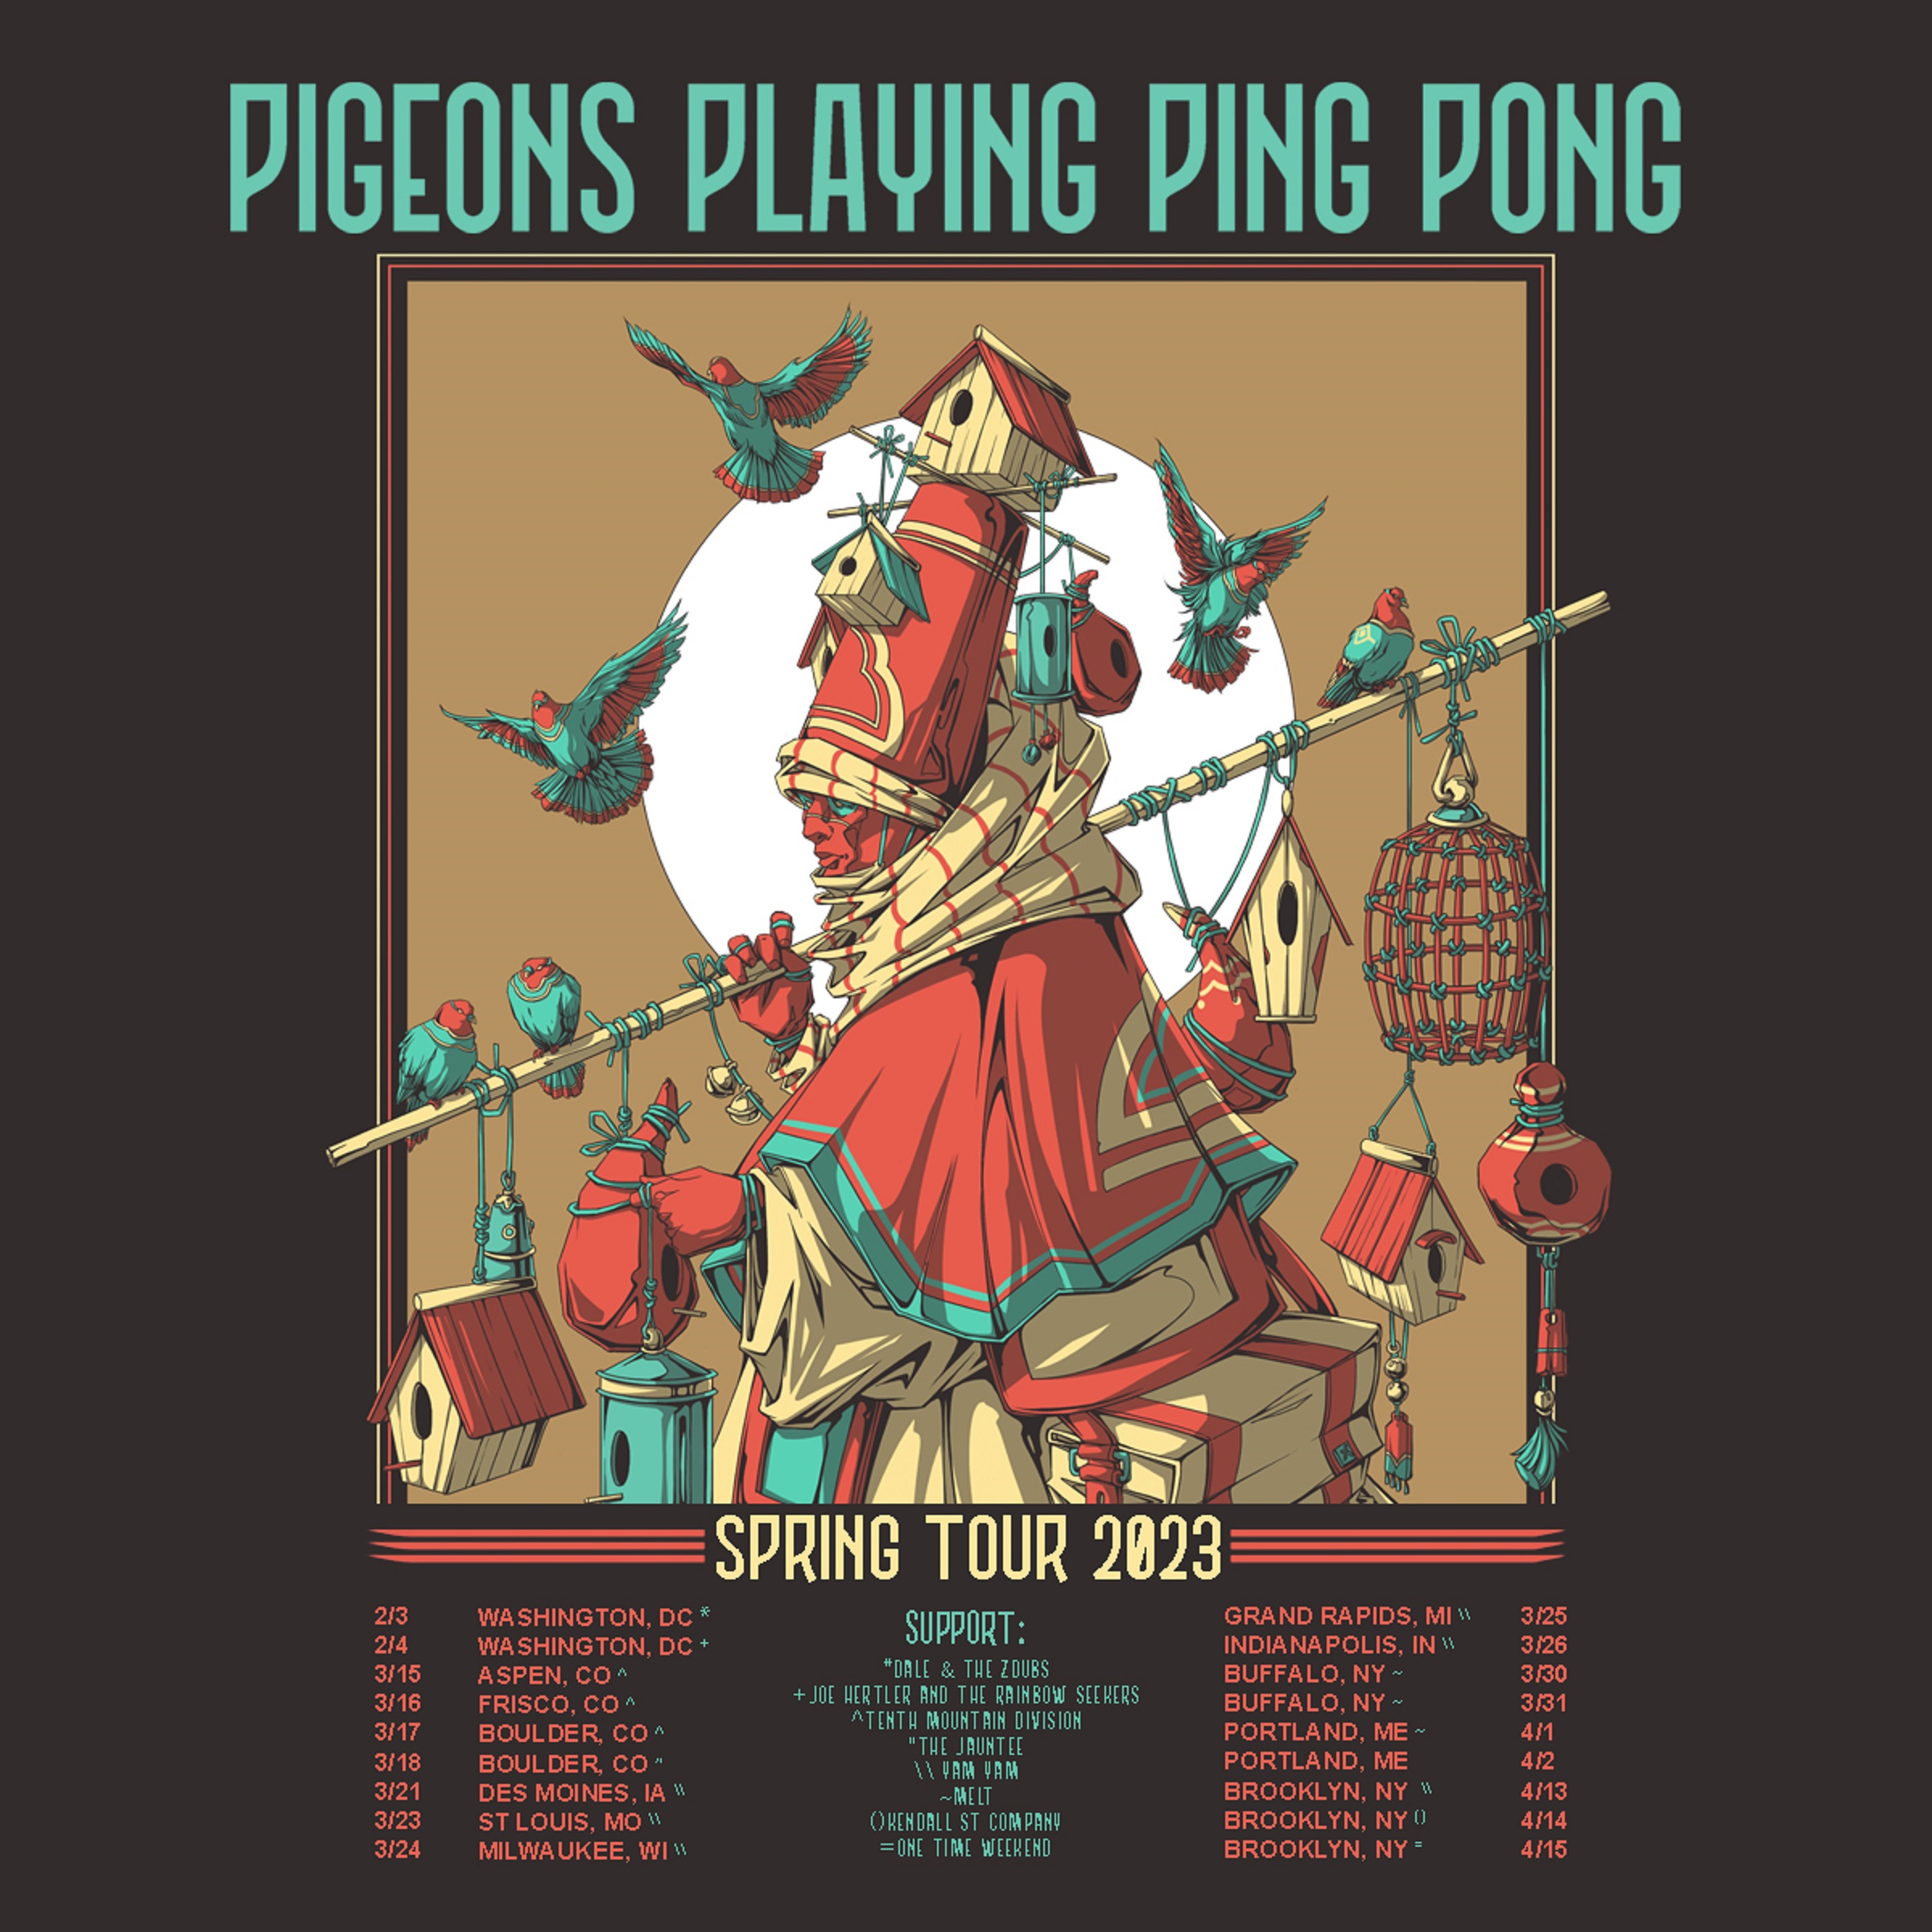 PIGEONS PLAYING PING PONG ANNOUNCES SPRING TOUR 2023